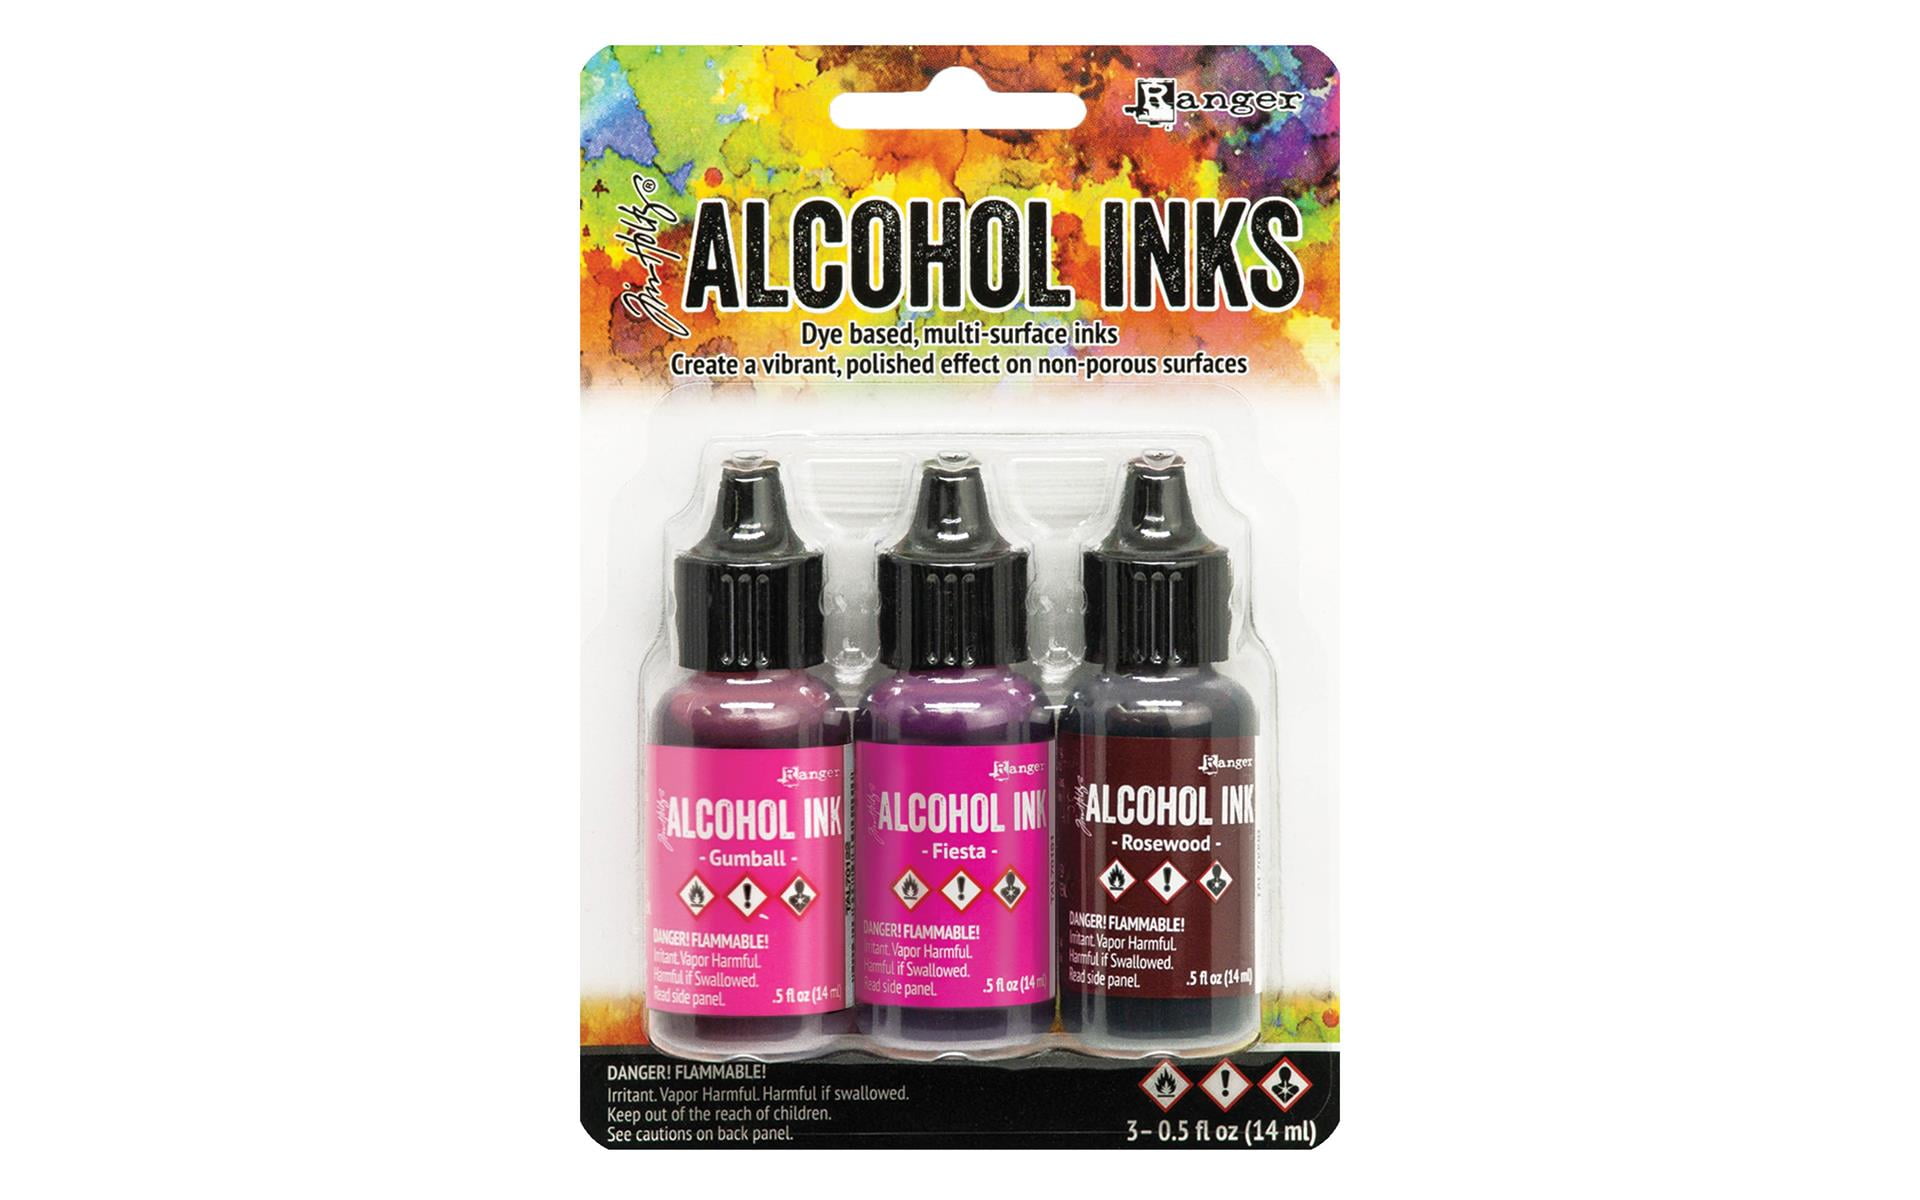 Alcohol Ink Paper 25 Sheets Pixiss Heavy Weight Paper for Alcohol Ink & Watercolor, Synthetic Paper A4 12x12 Inches 305x305mm, 300gsm, Size: 12x12 25